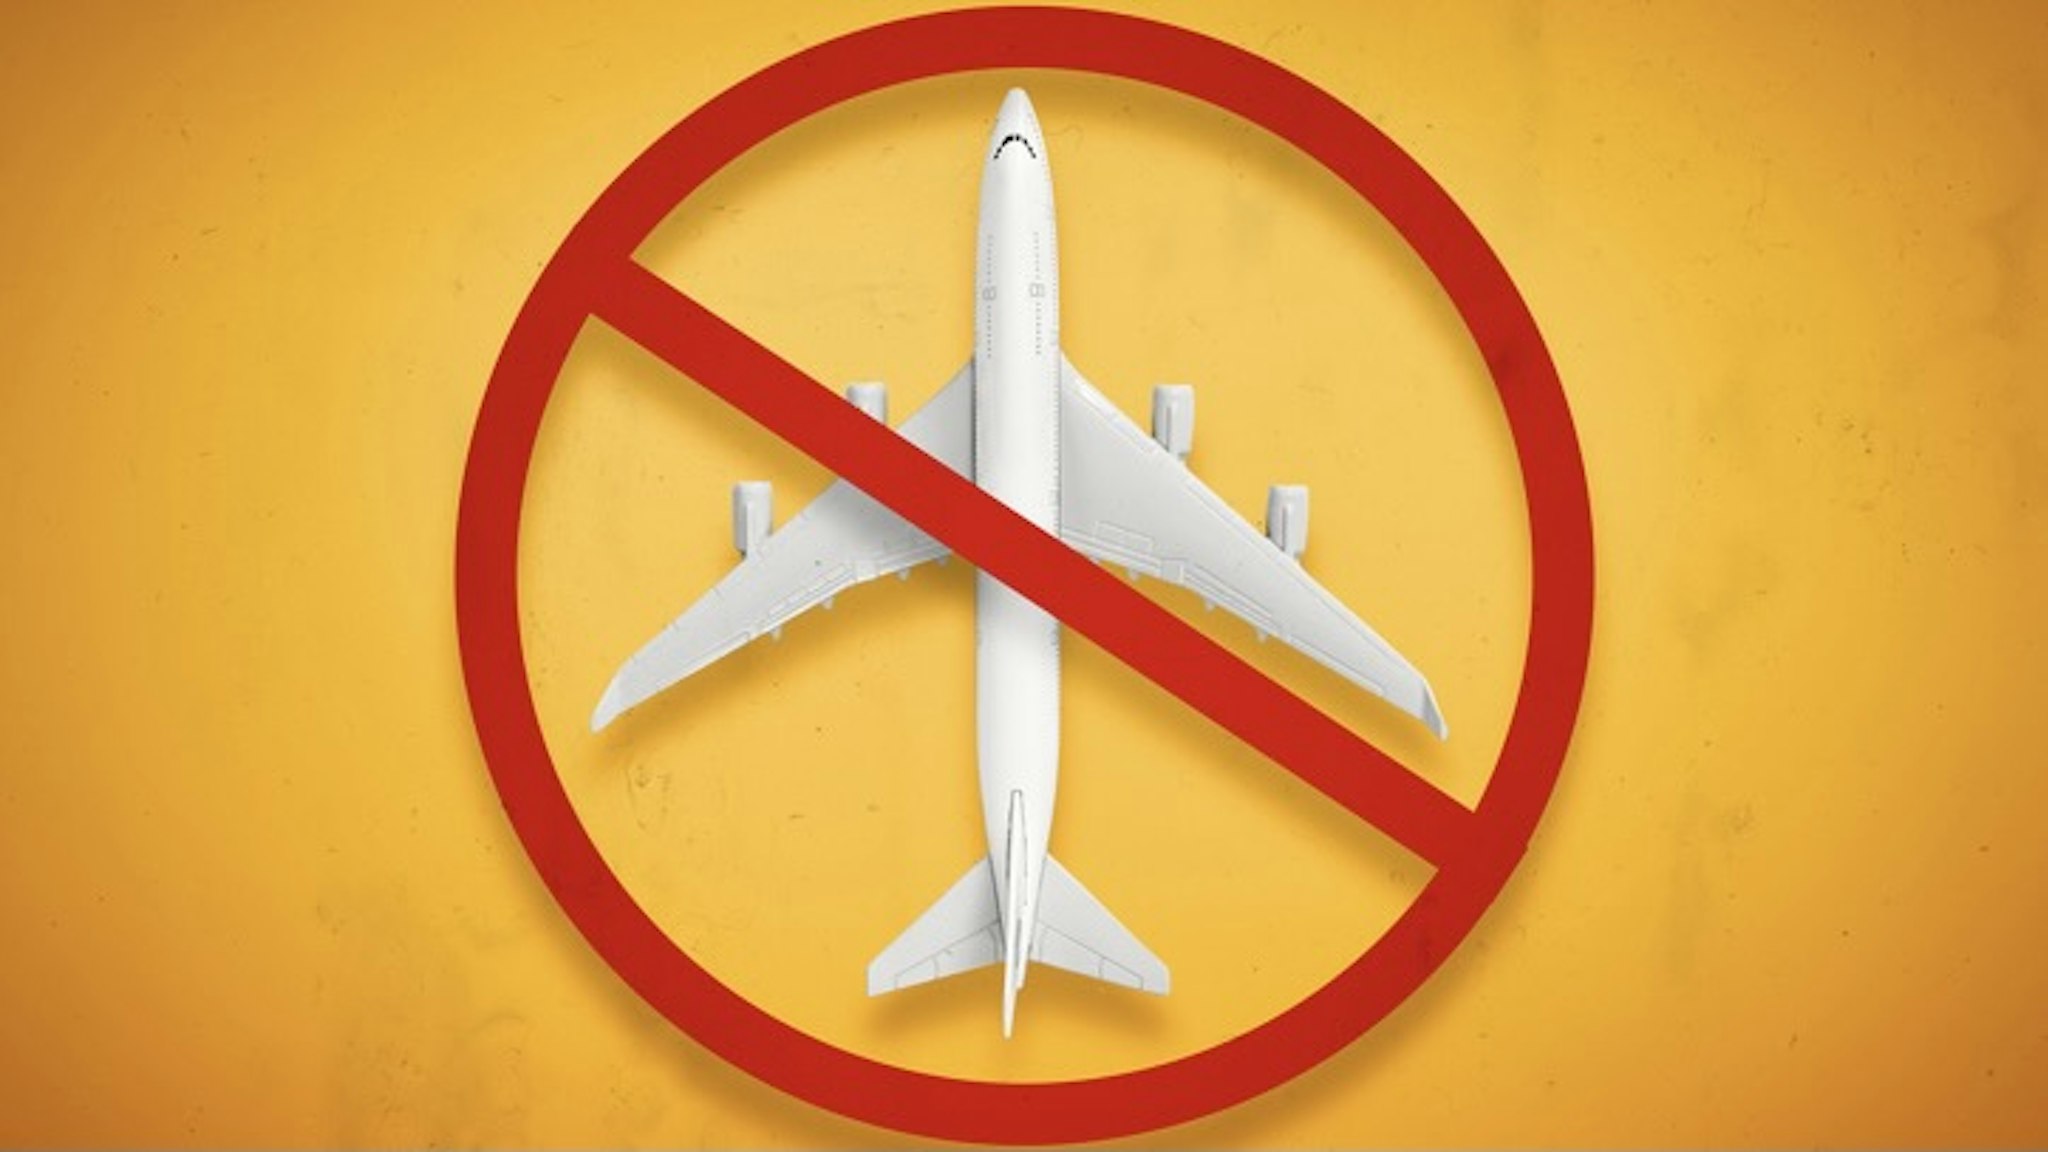 Travel Ban. Forbidden Airplane and Flight Ban Concept. - stock photo Constantine Johnny via Getty Images